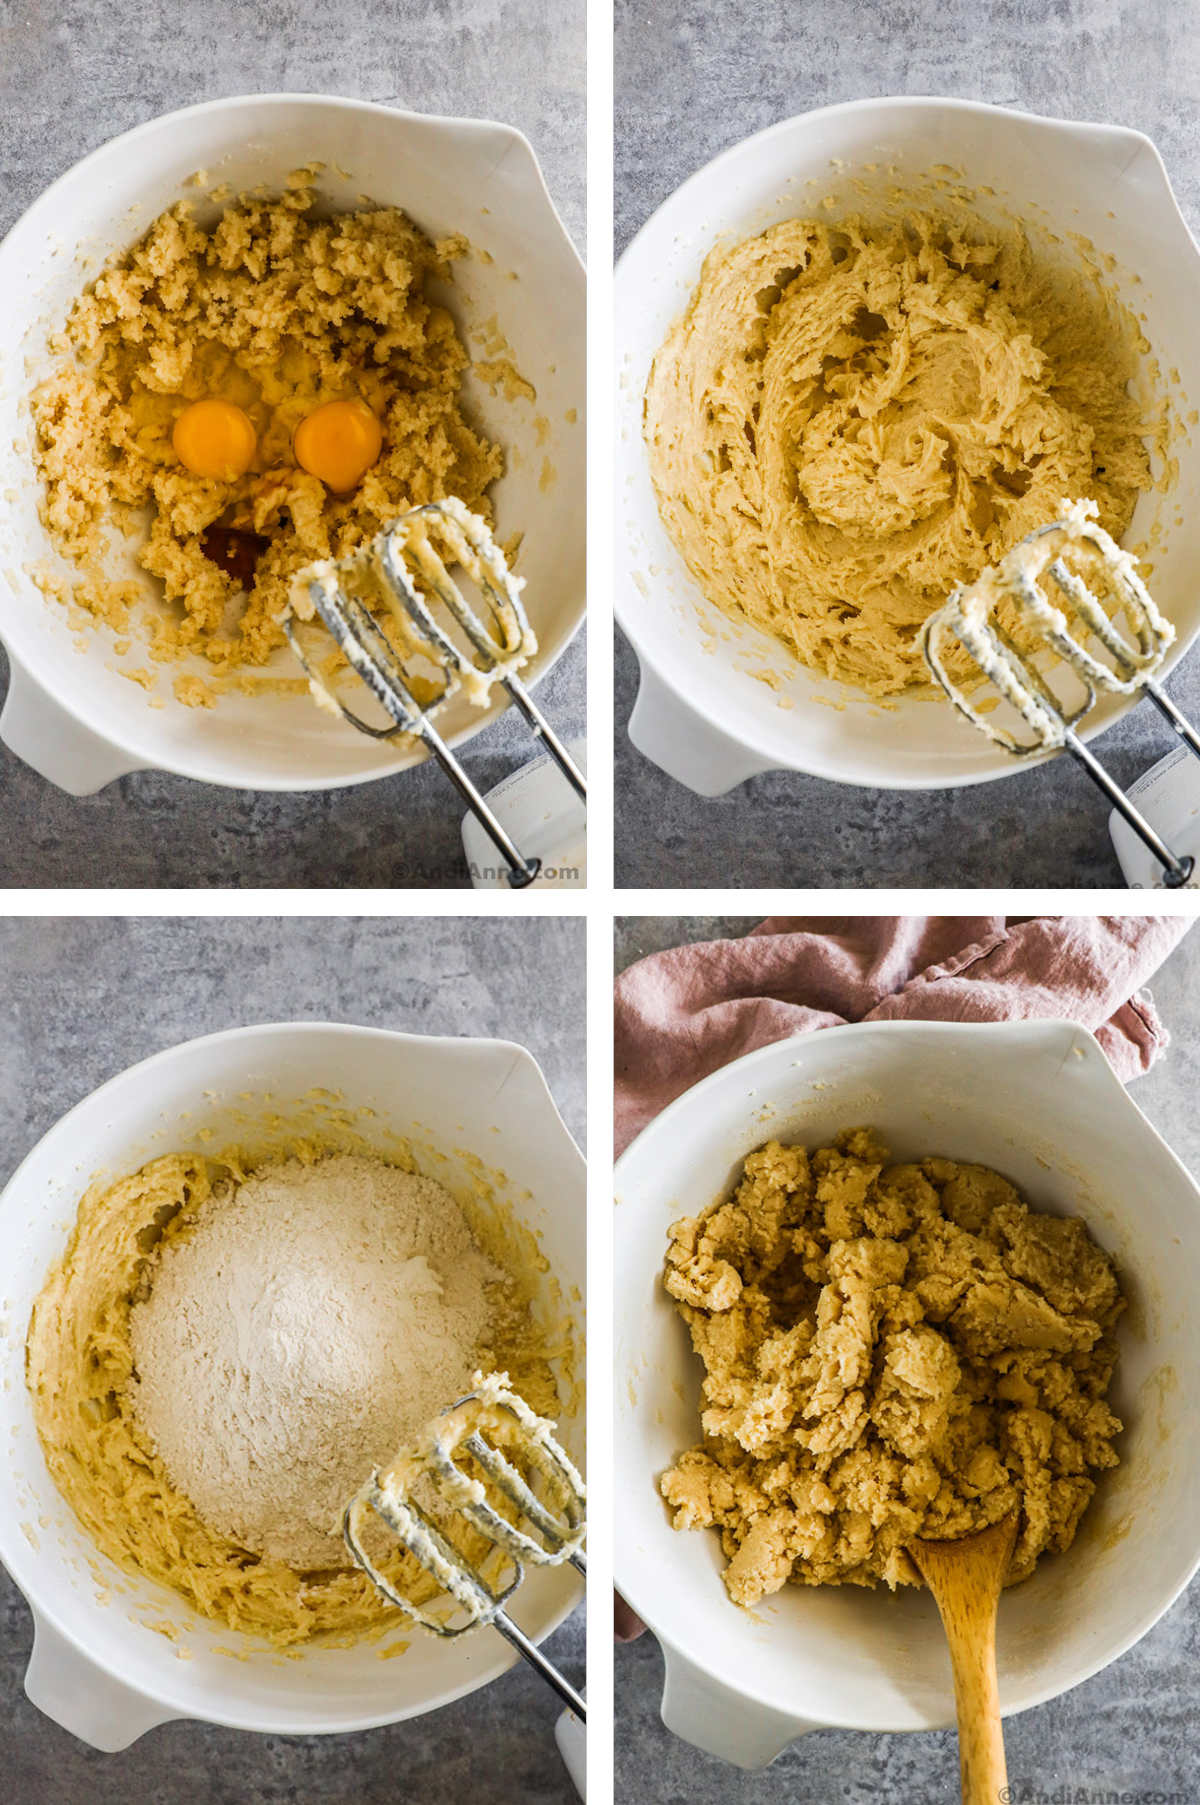 Four overhead images in one: 1. Eggs are added to batter. 2. Eggs are mixed into batter. 3. Dry ingredients are added to batter in white bowl. 4. Dry ingredients are mixed in. 